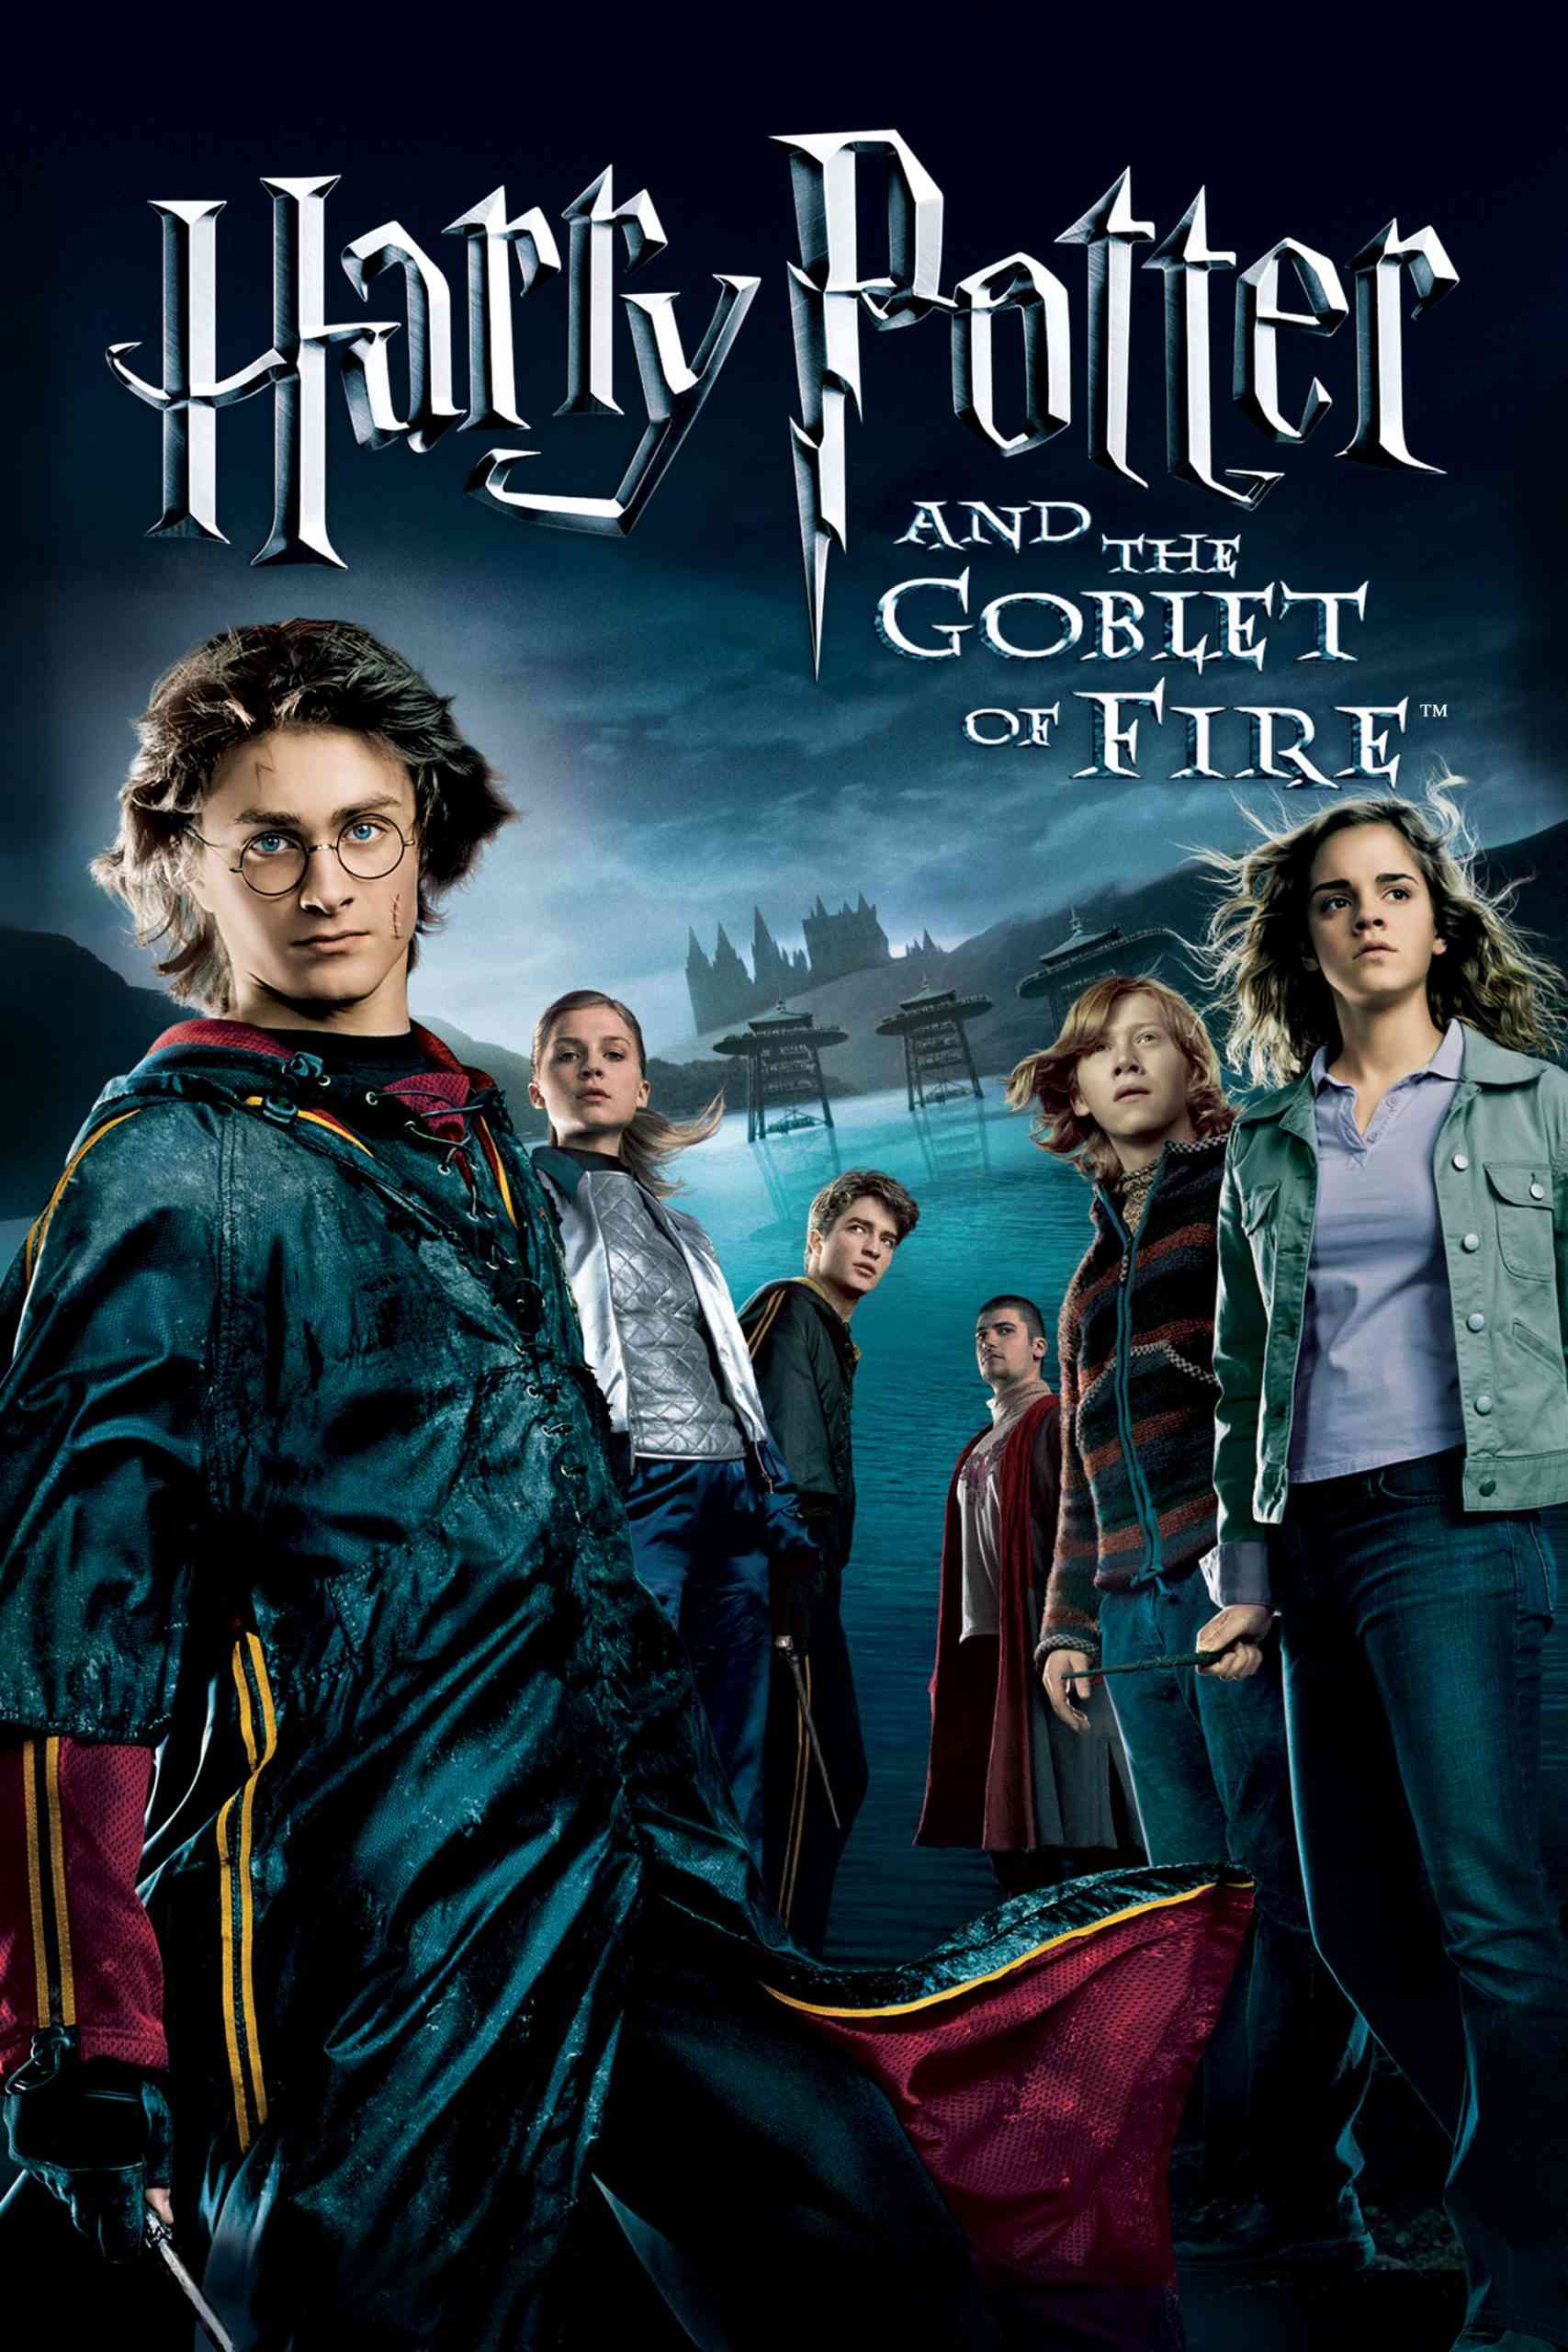 FULL MOVIE: Harry Potter and the Goblet of Fire (2005)